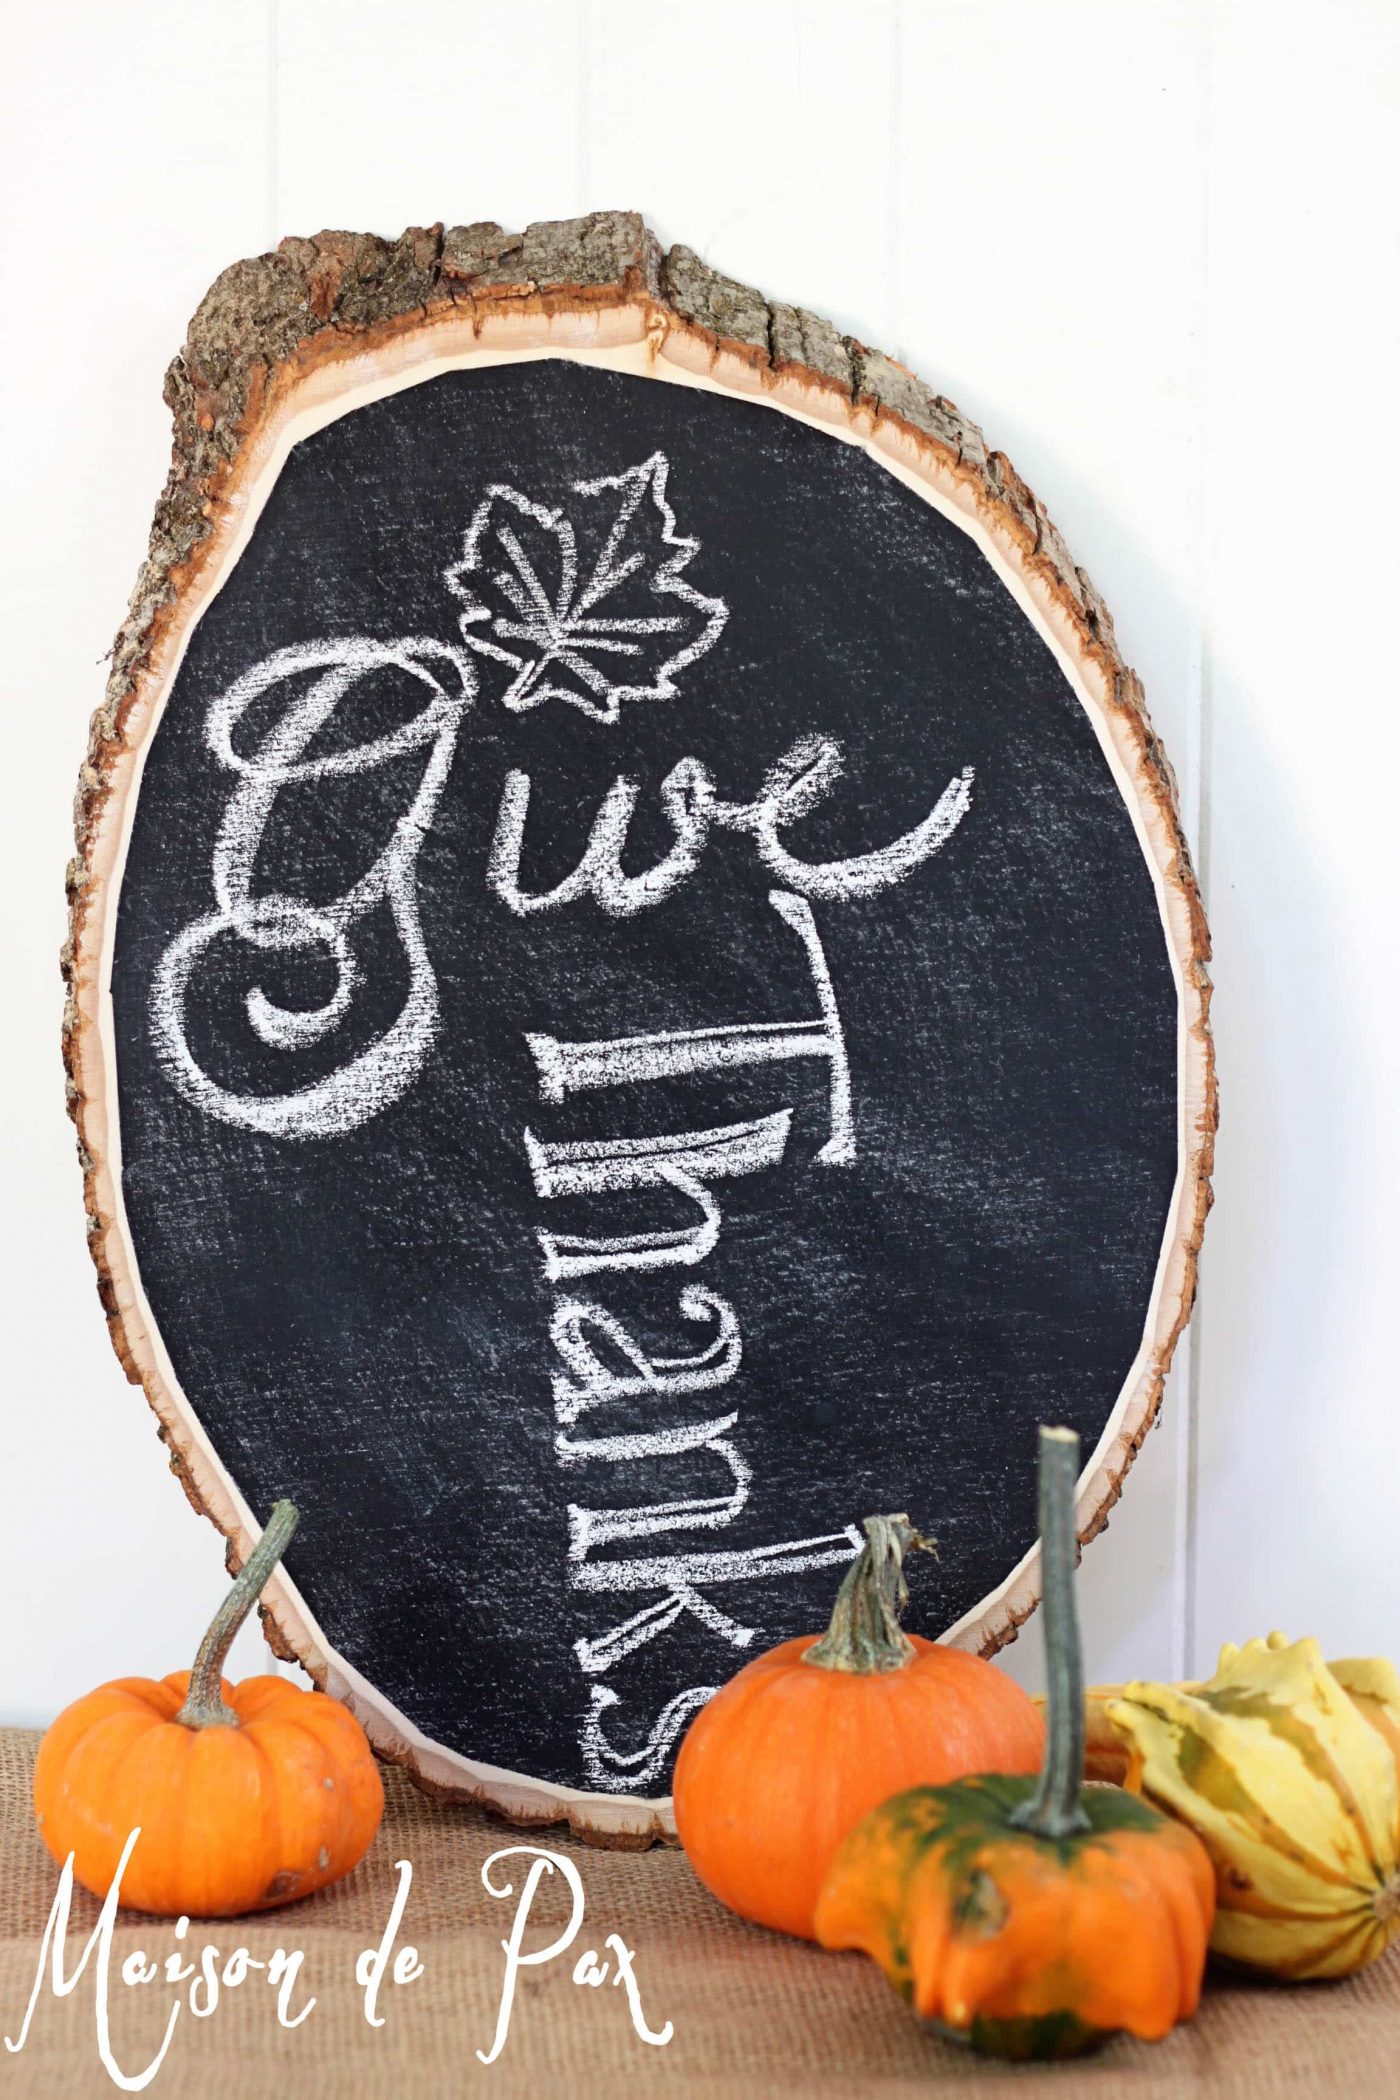 fall vignette using rustic wood chalkboard and small gourds